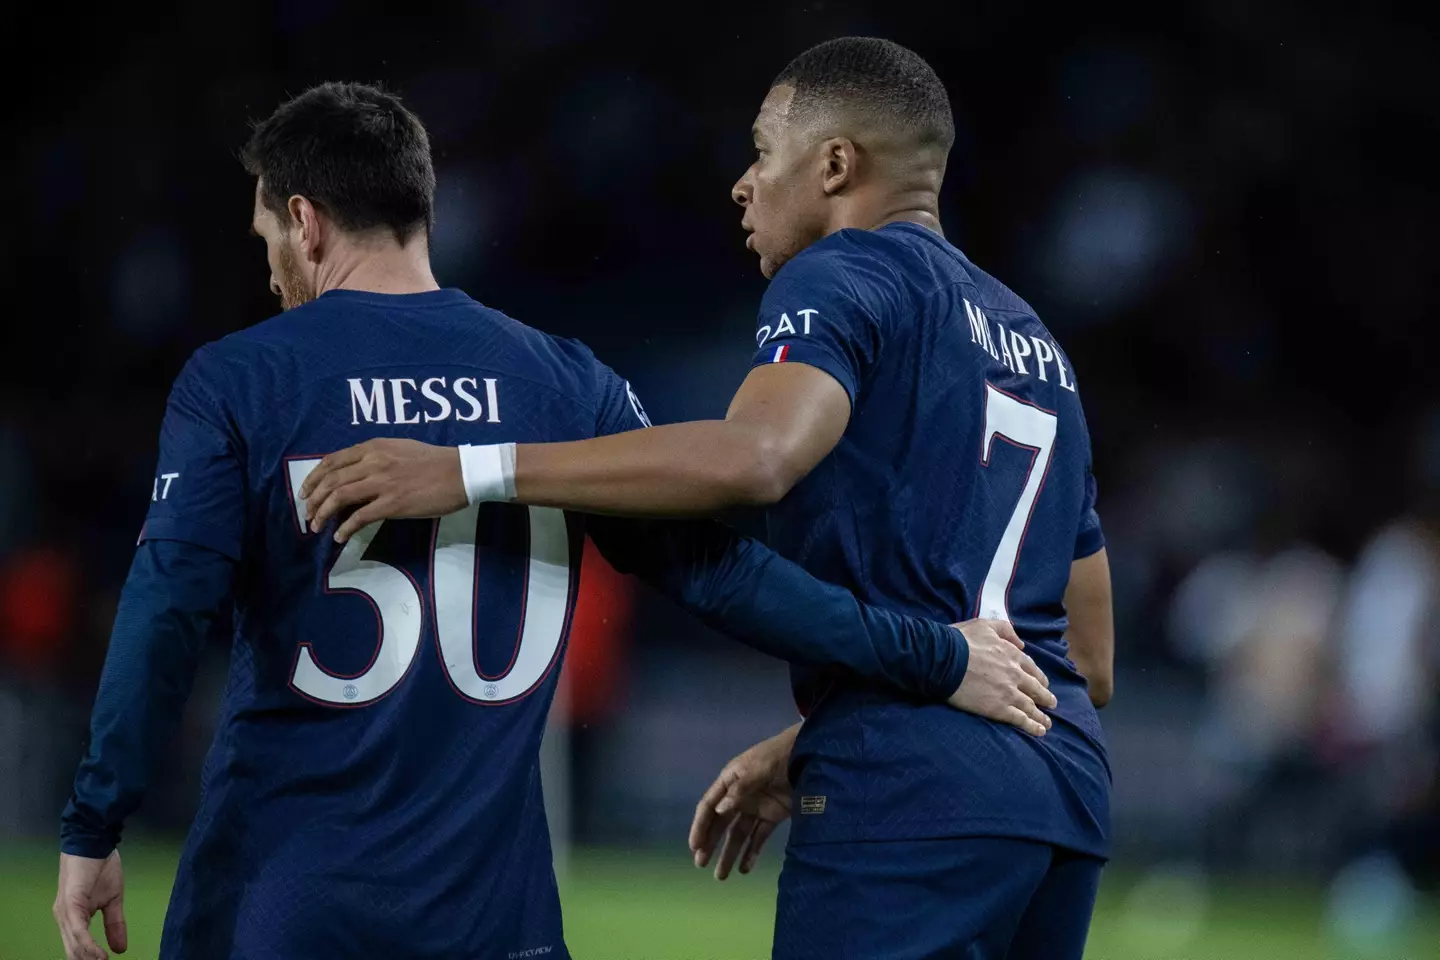 Mbappe and Messi are set to be reunited on opposite sides of the pitch on Sunday. Image: Alamy